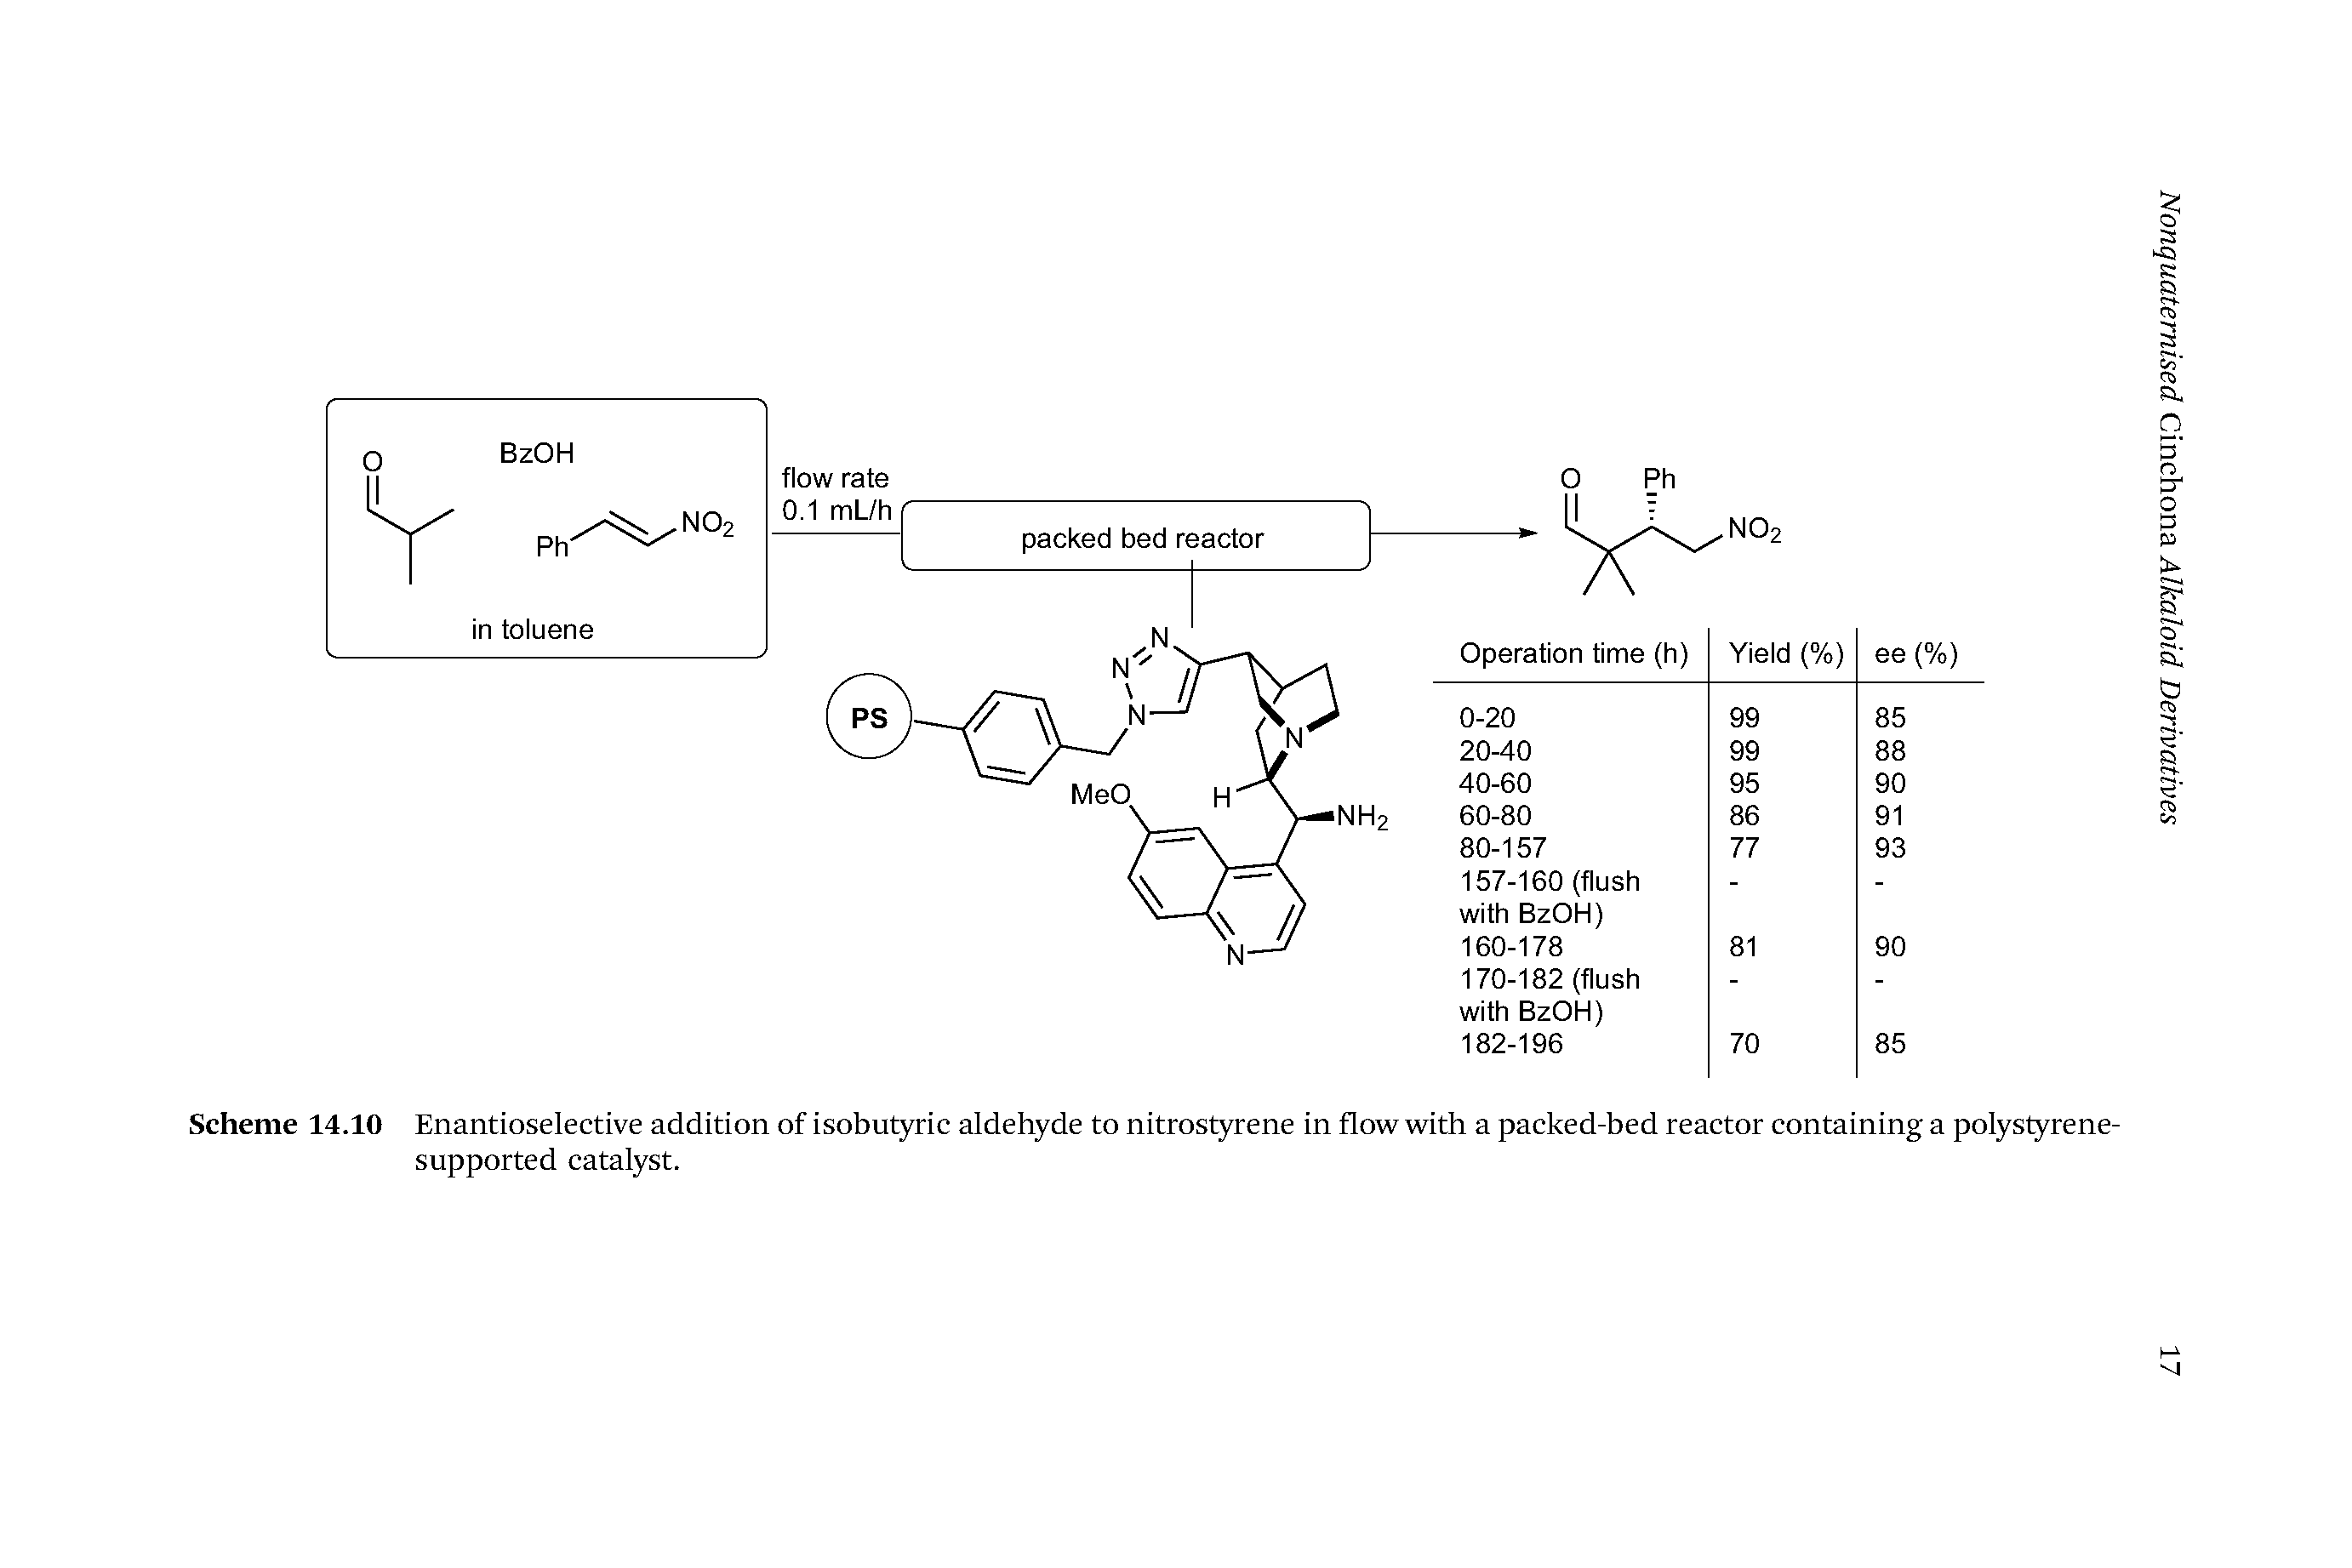 Scheme 14.10 Enantioselective addition of isobutyric aldehyde to nitrostyrene in flow with a packed-bed reactor containing a polystyrene-supported catalyst.